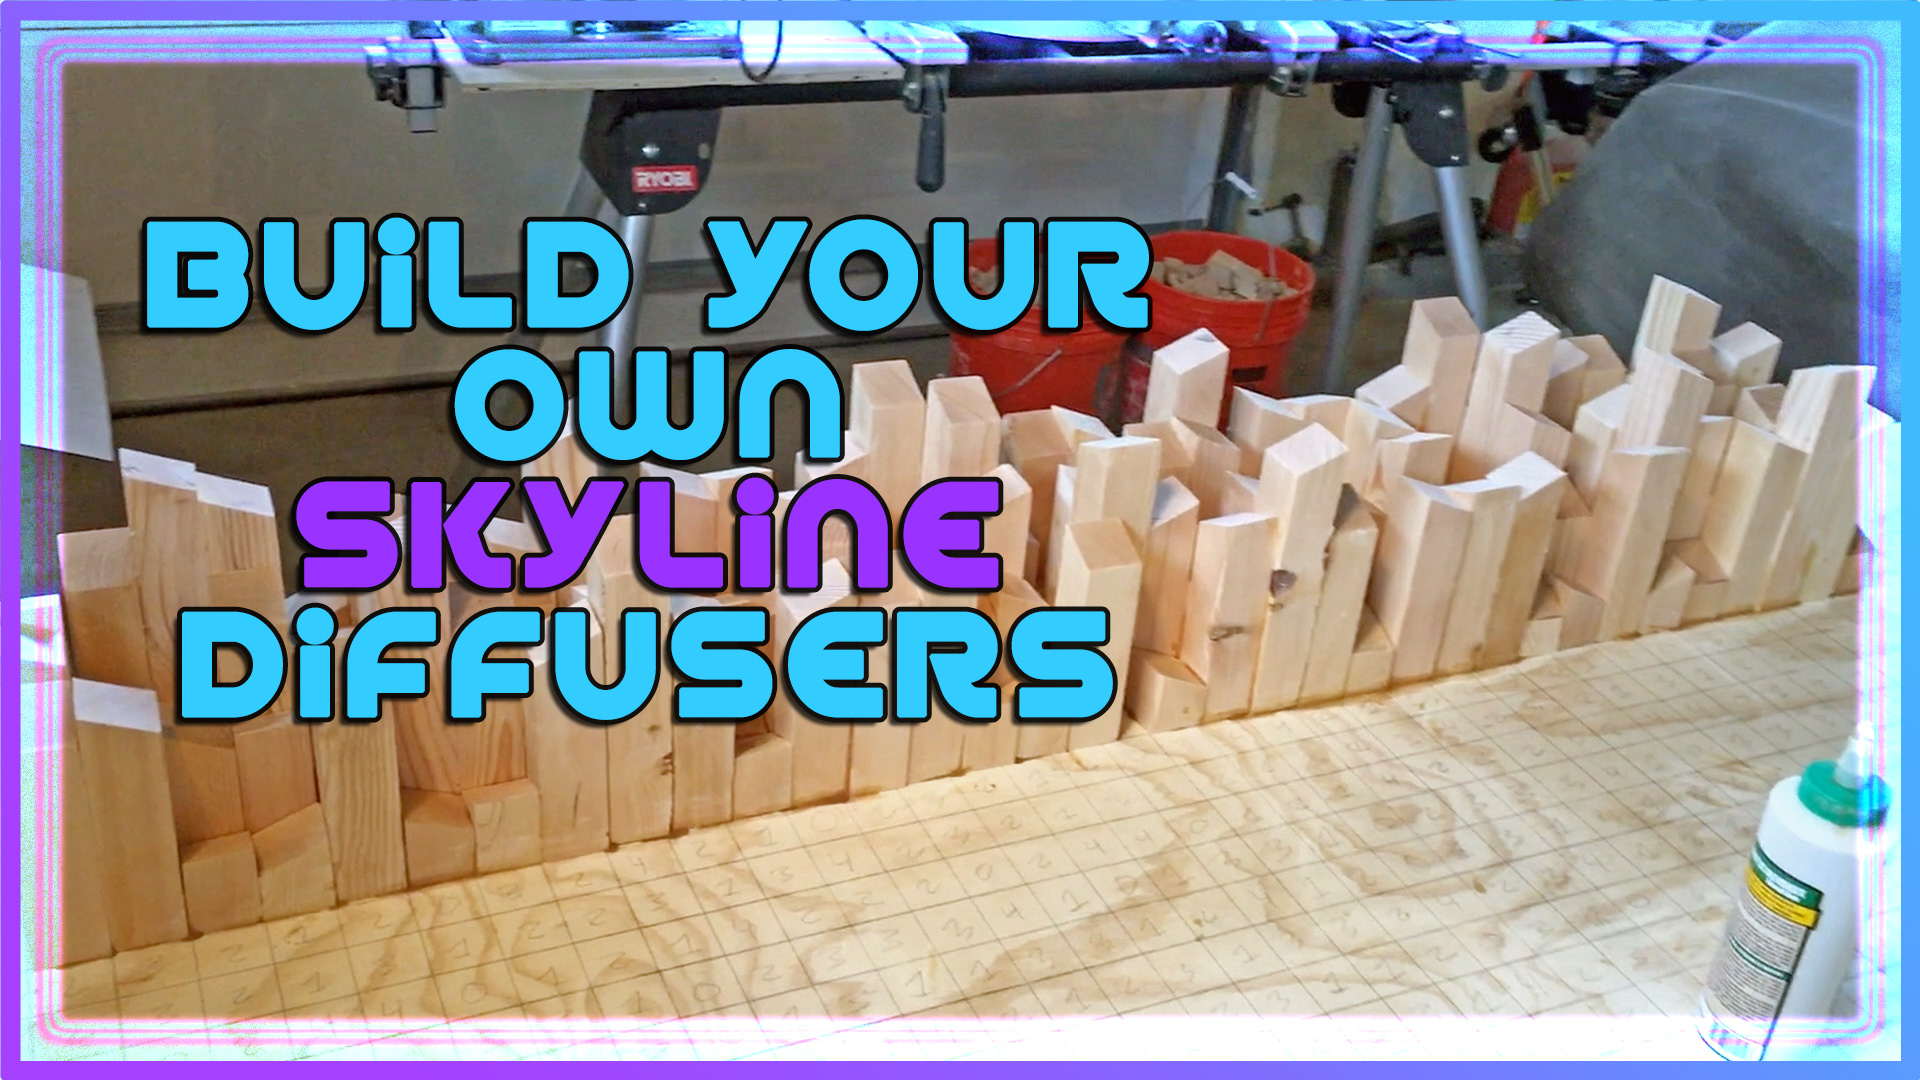 Video on how to build your own skyline sound diffuser